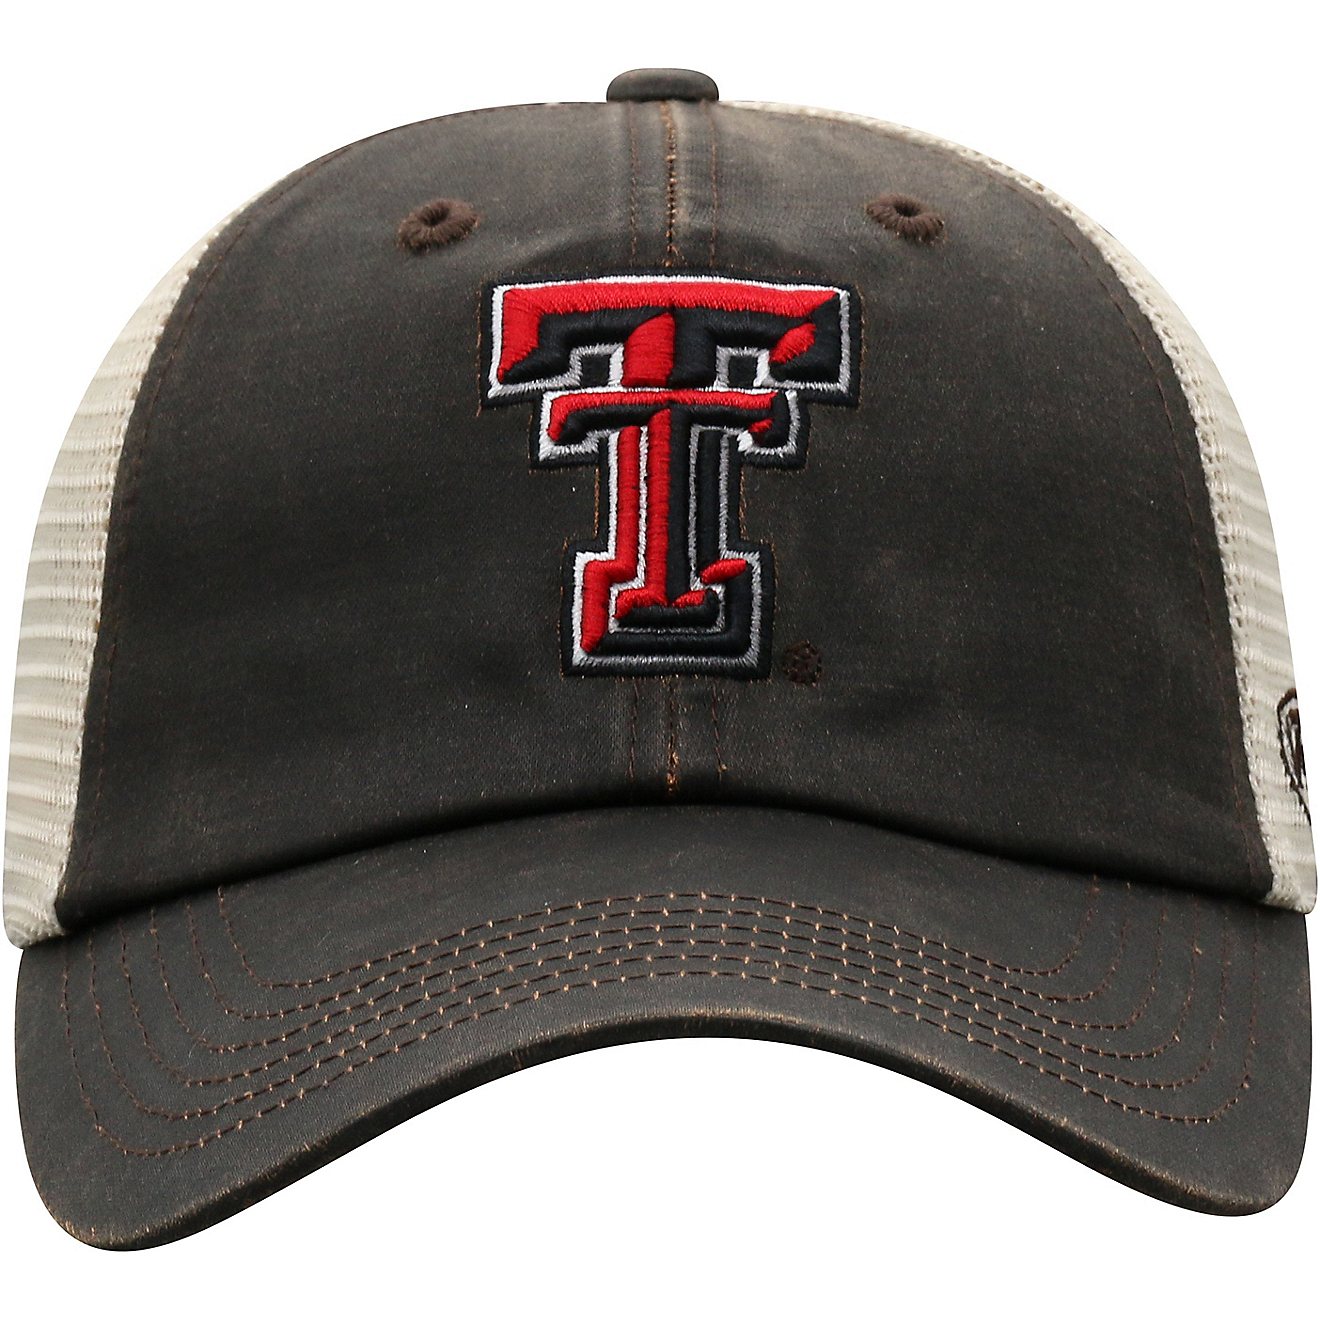 Top of the World Adults' Texas Tech University ScatMesh Cap                                                                      - view number 4